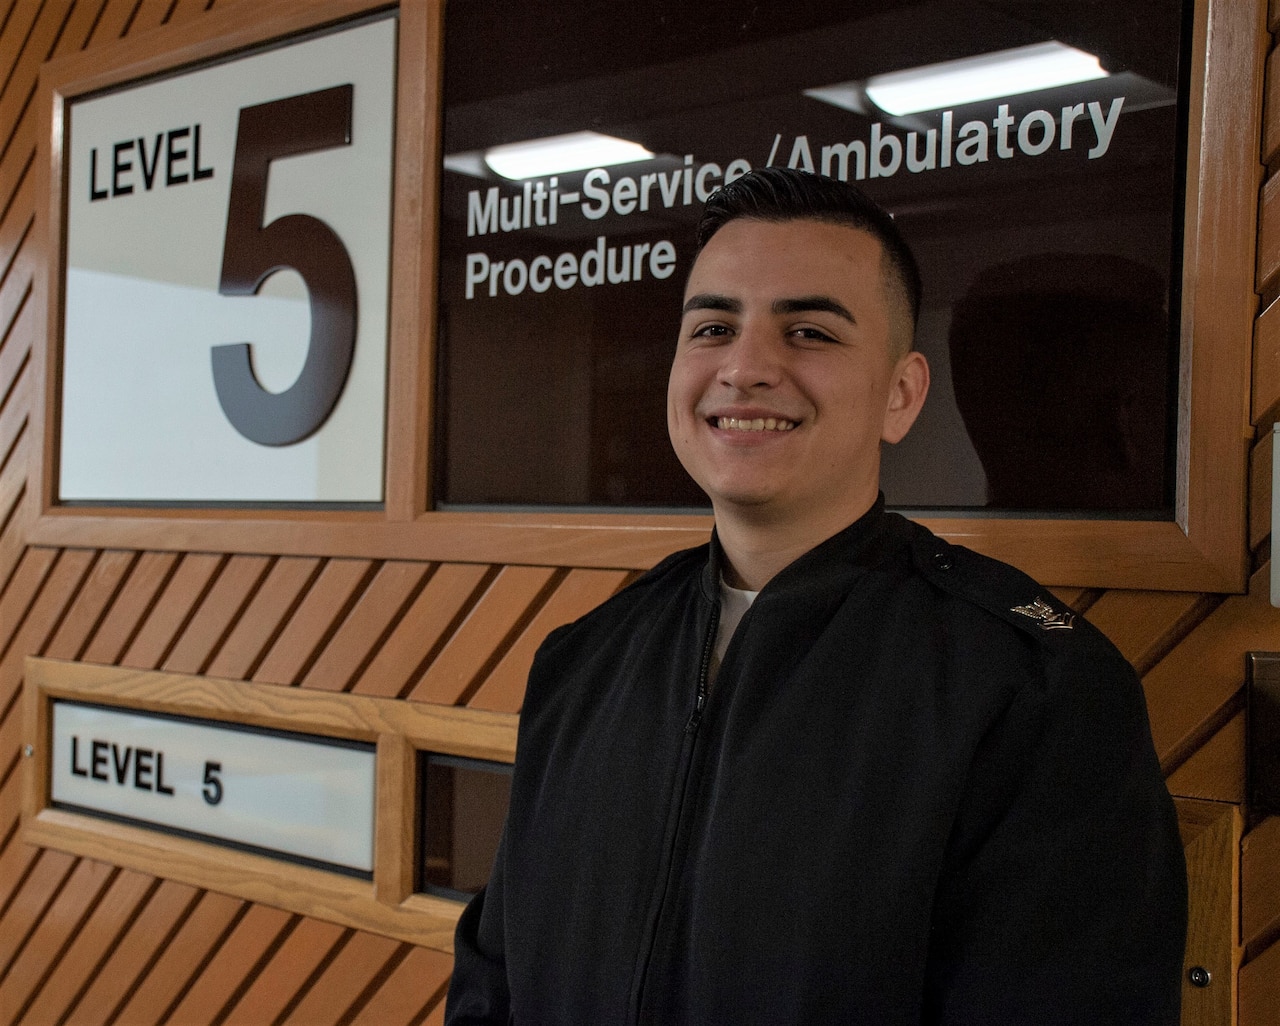 A sailor stands in front of a hospital unit sign in a hallway, smiling for the camera.